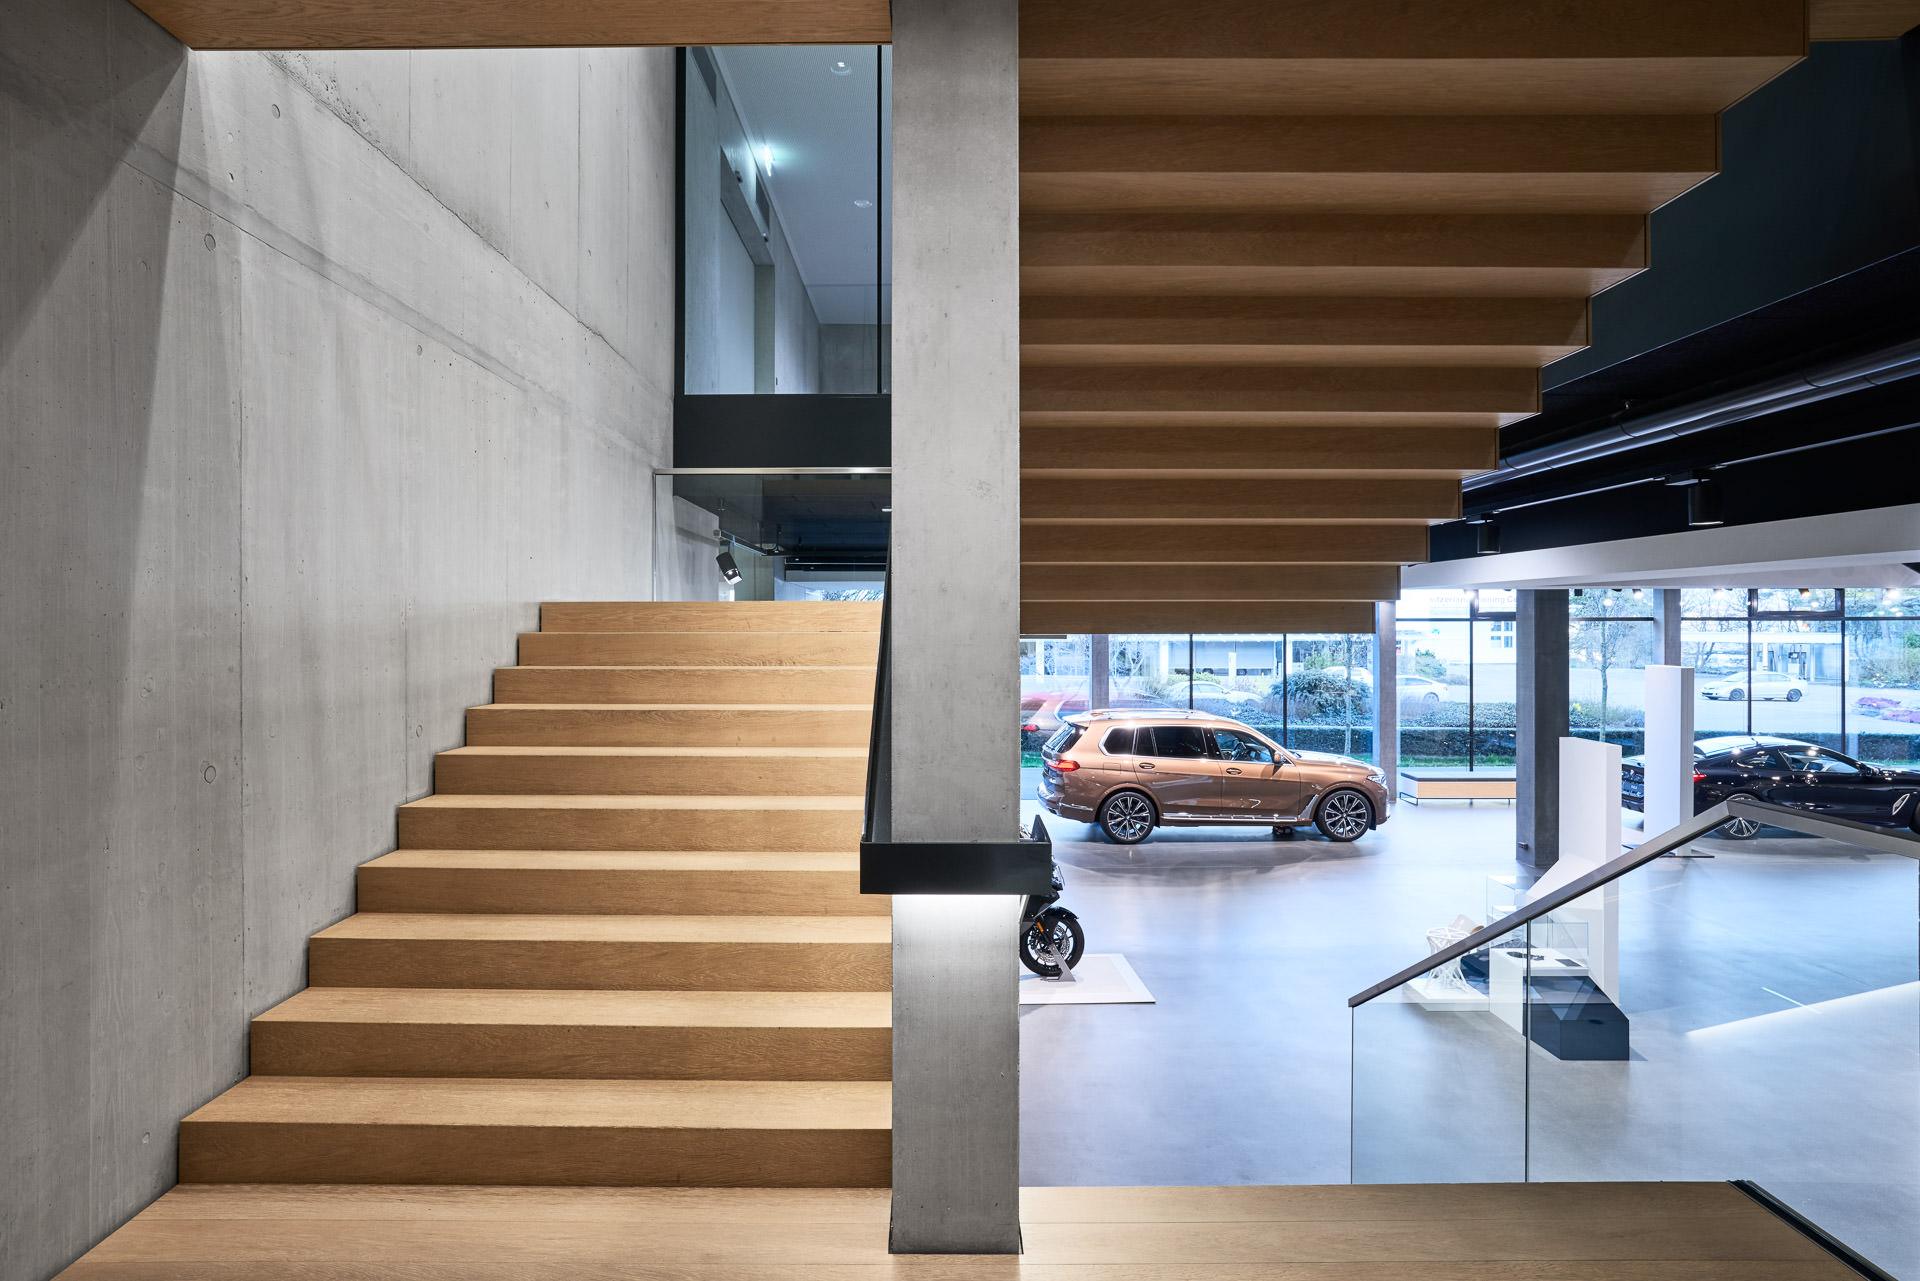 Stairs and exclusive car - Architectural photography